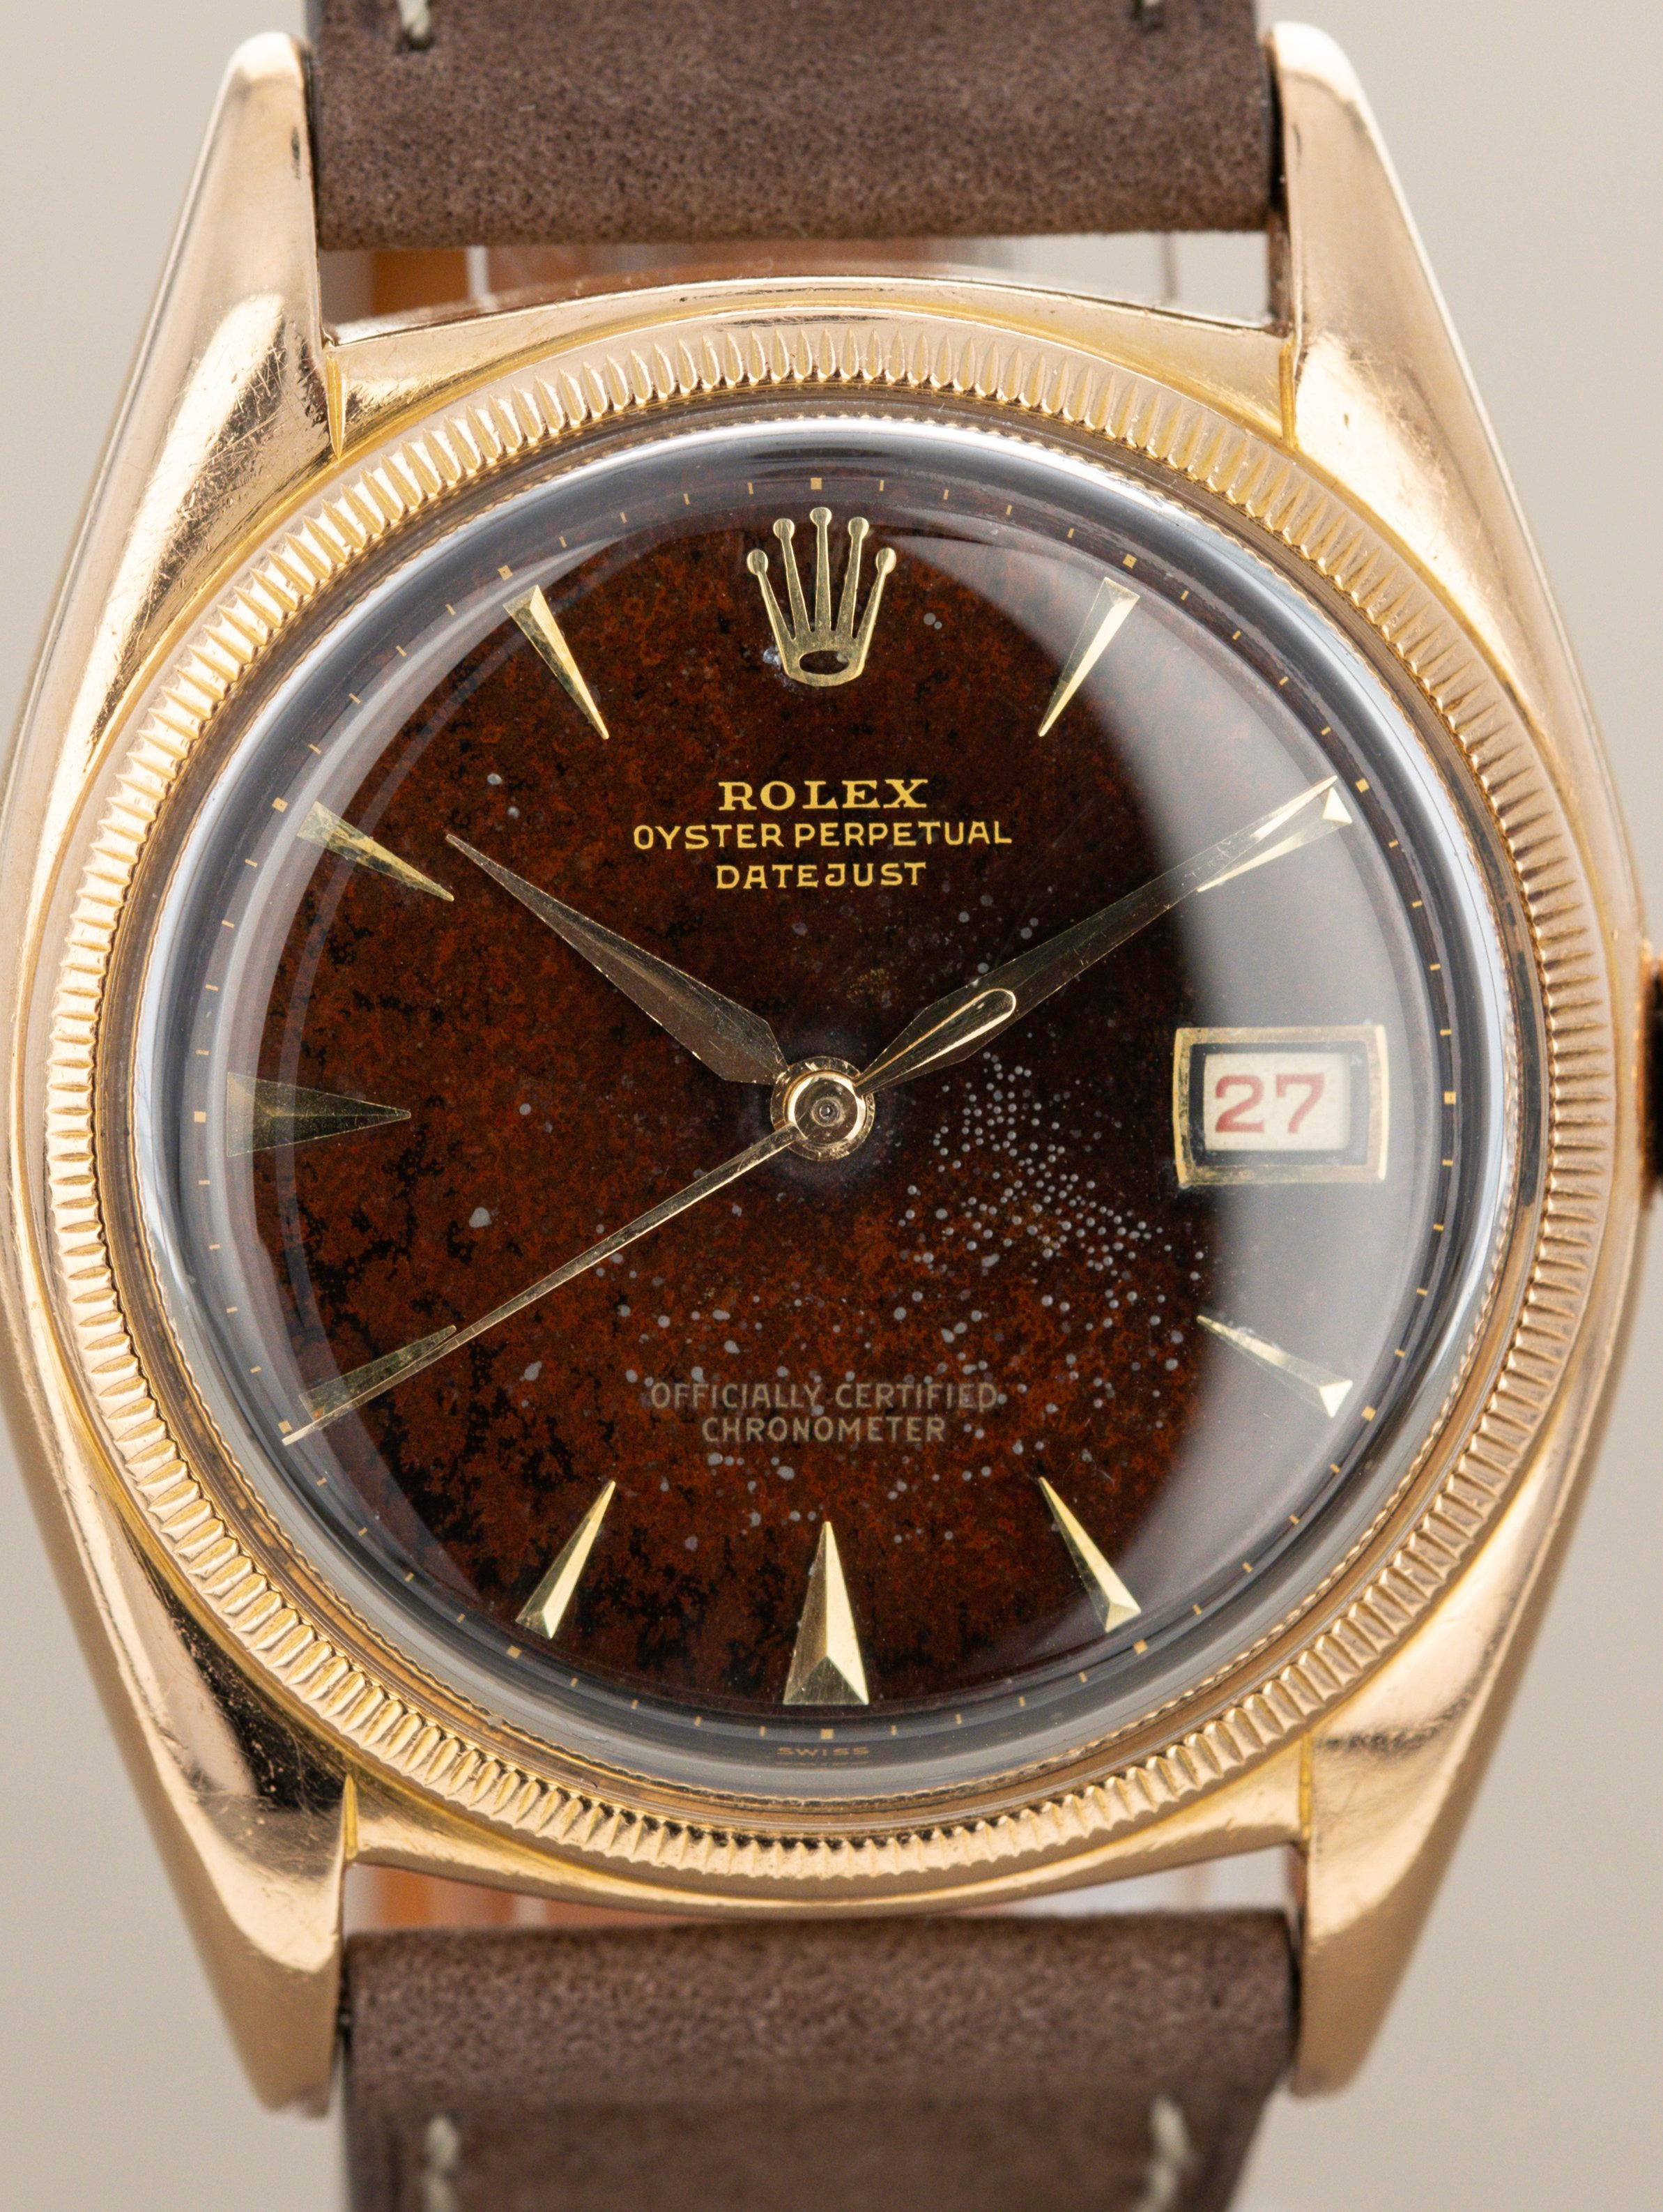 Rolex Datejust Ref. 6105 Rose Gold - 'Tropical' Dial